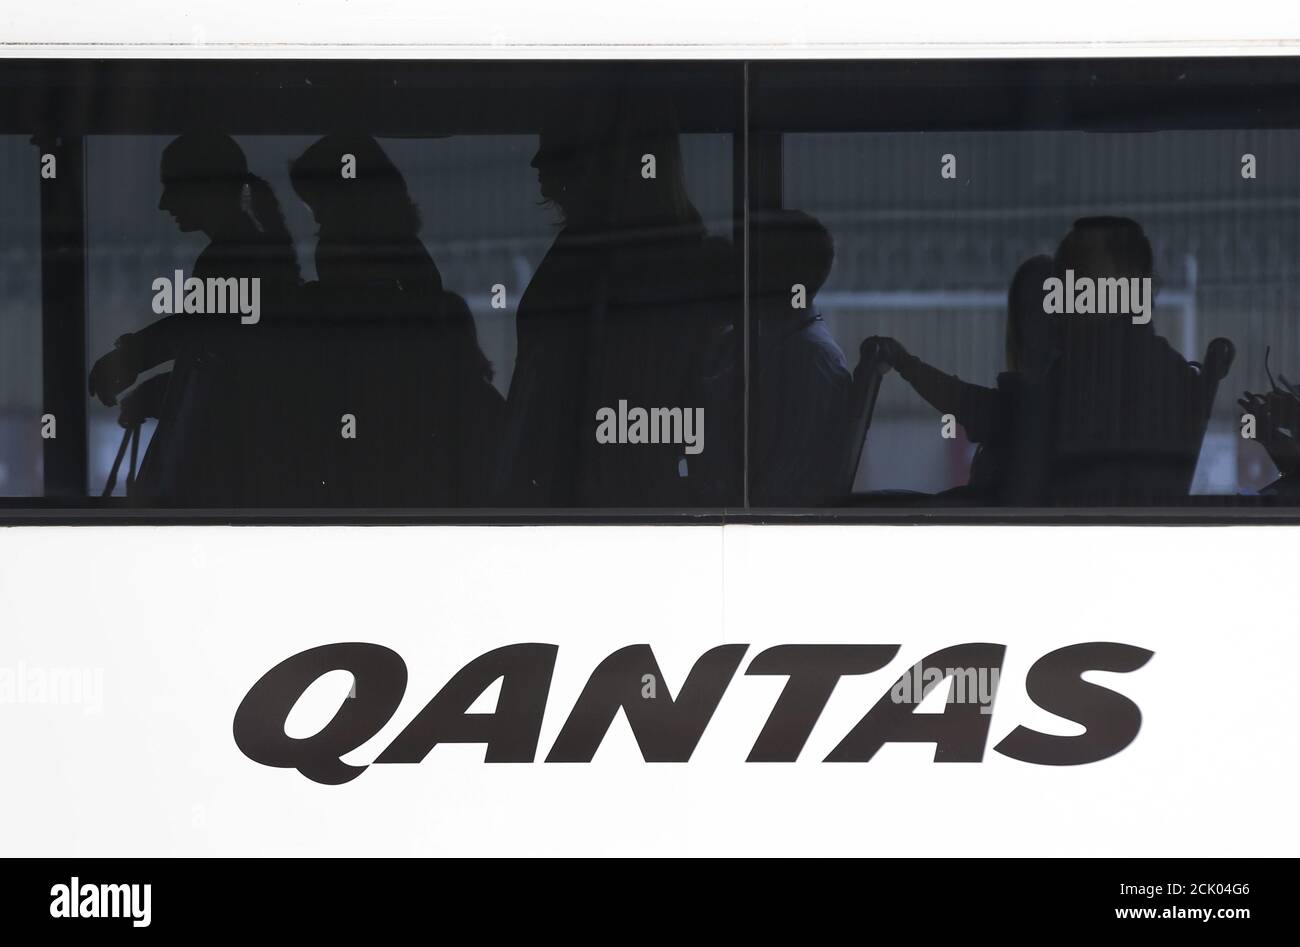 Staff of Qantas airlines are pictured on a company bus at they arrive at a hangar during an event marking the 95th anniversary of the Airline, at Sydney International Airport, November 16, 2015.   REUTERS/Jason Reed Stock Photo